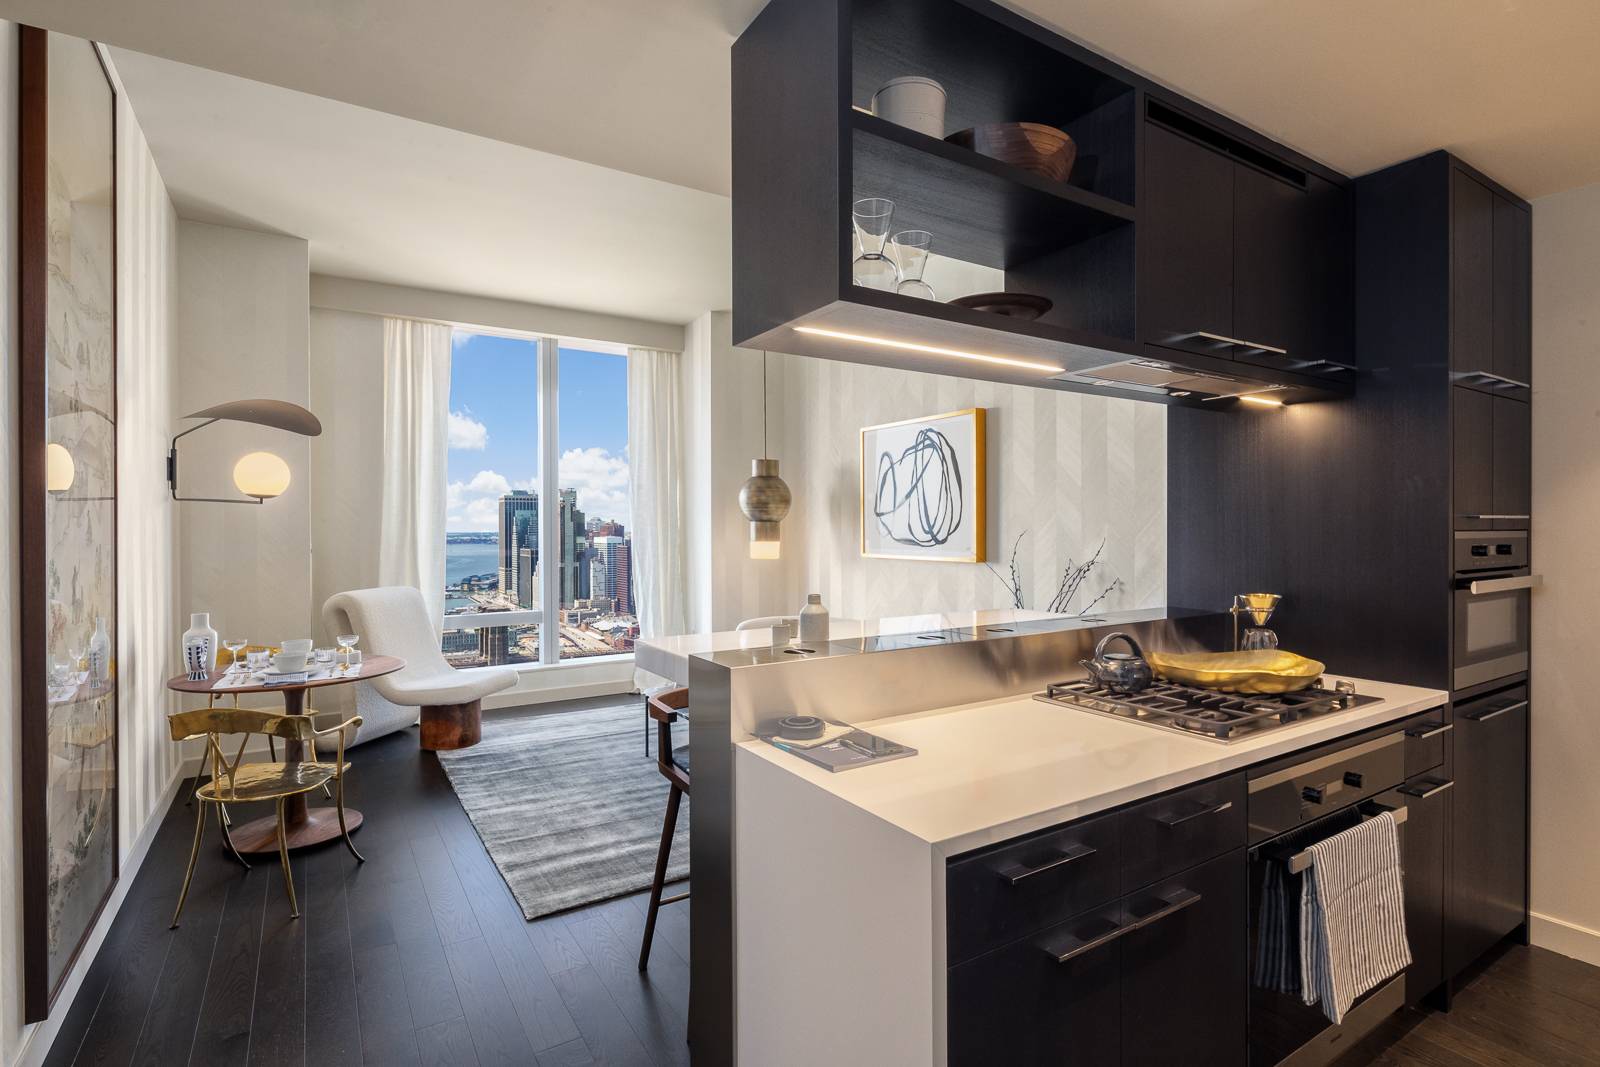 Residence 62E is a 1, 400 square foot three bedroom, two bathroom with an open gourmet kitchen and breakfast bar.